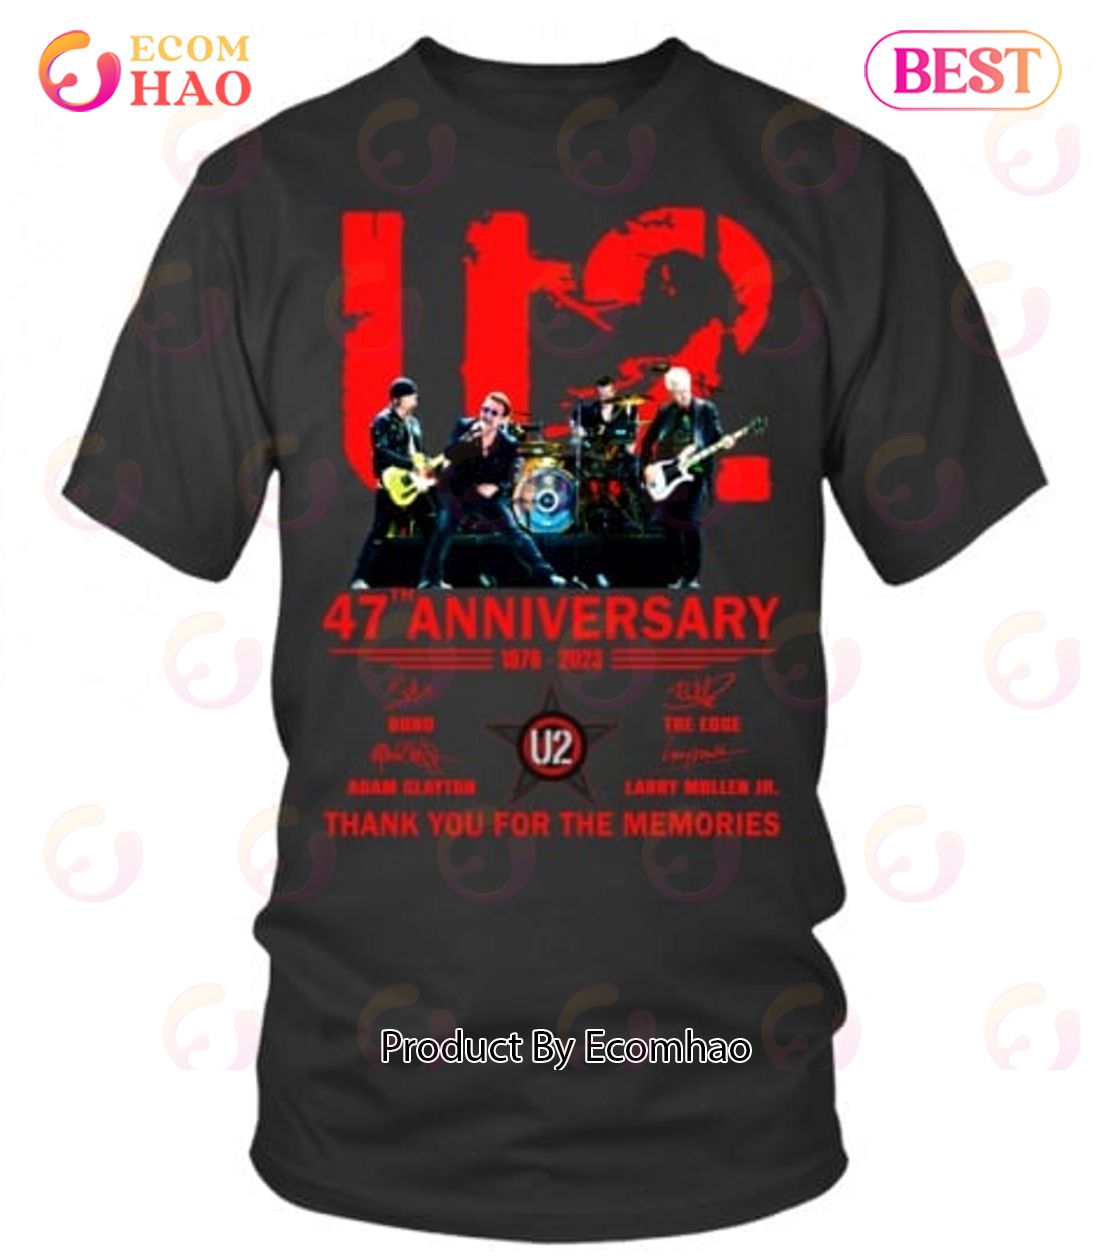 U2 47th Anniversary 1976 – 2023 Thank You For The Memories T-Shirt